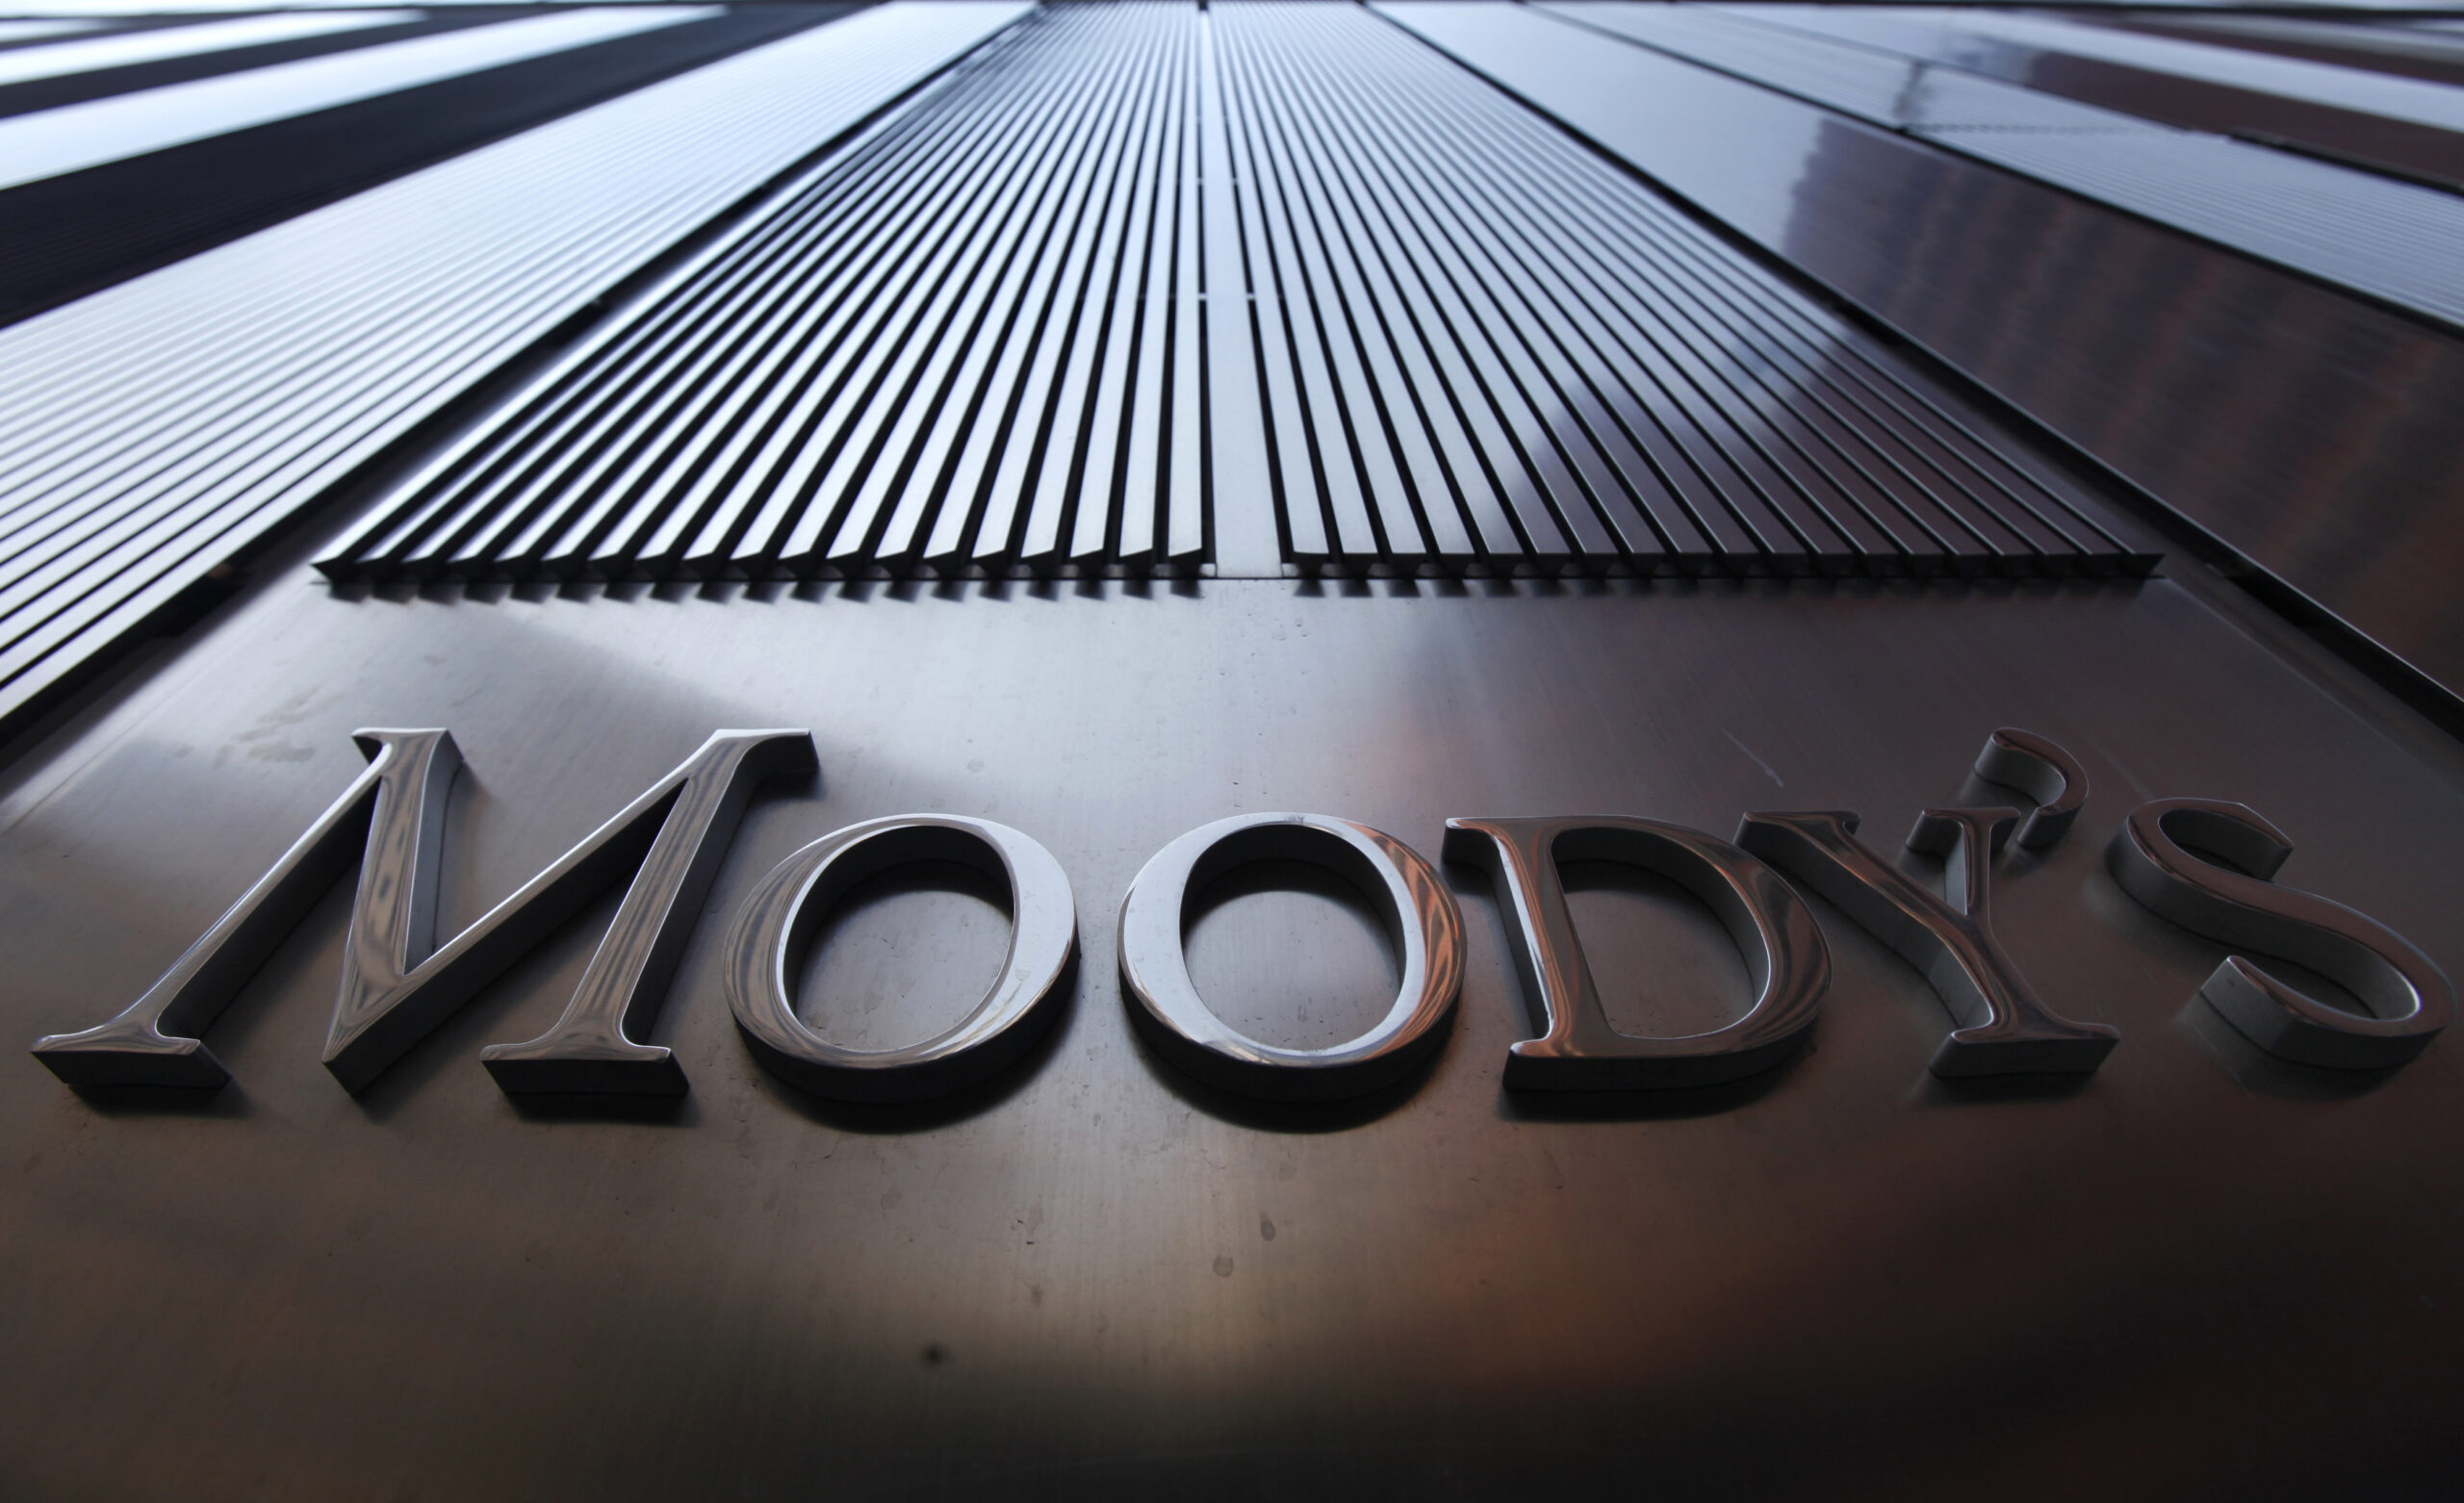 Moody’s puts Ghana on par with Sri Lanka on restructuring plan